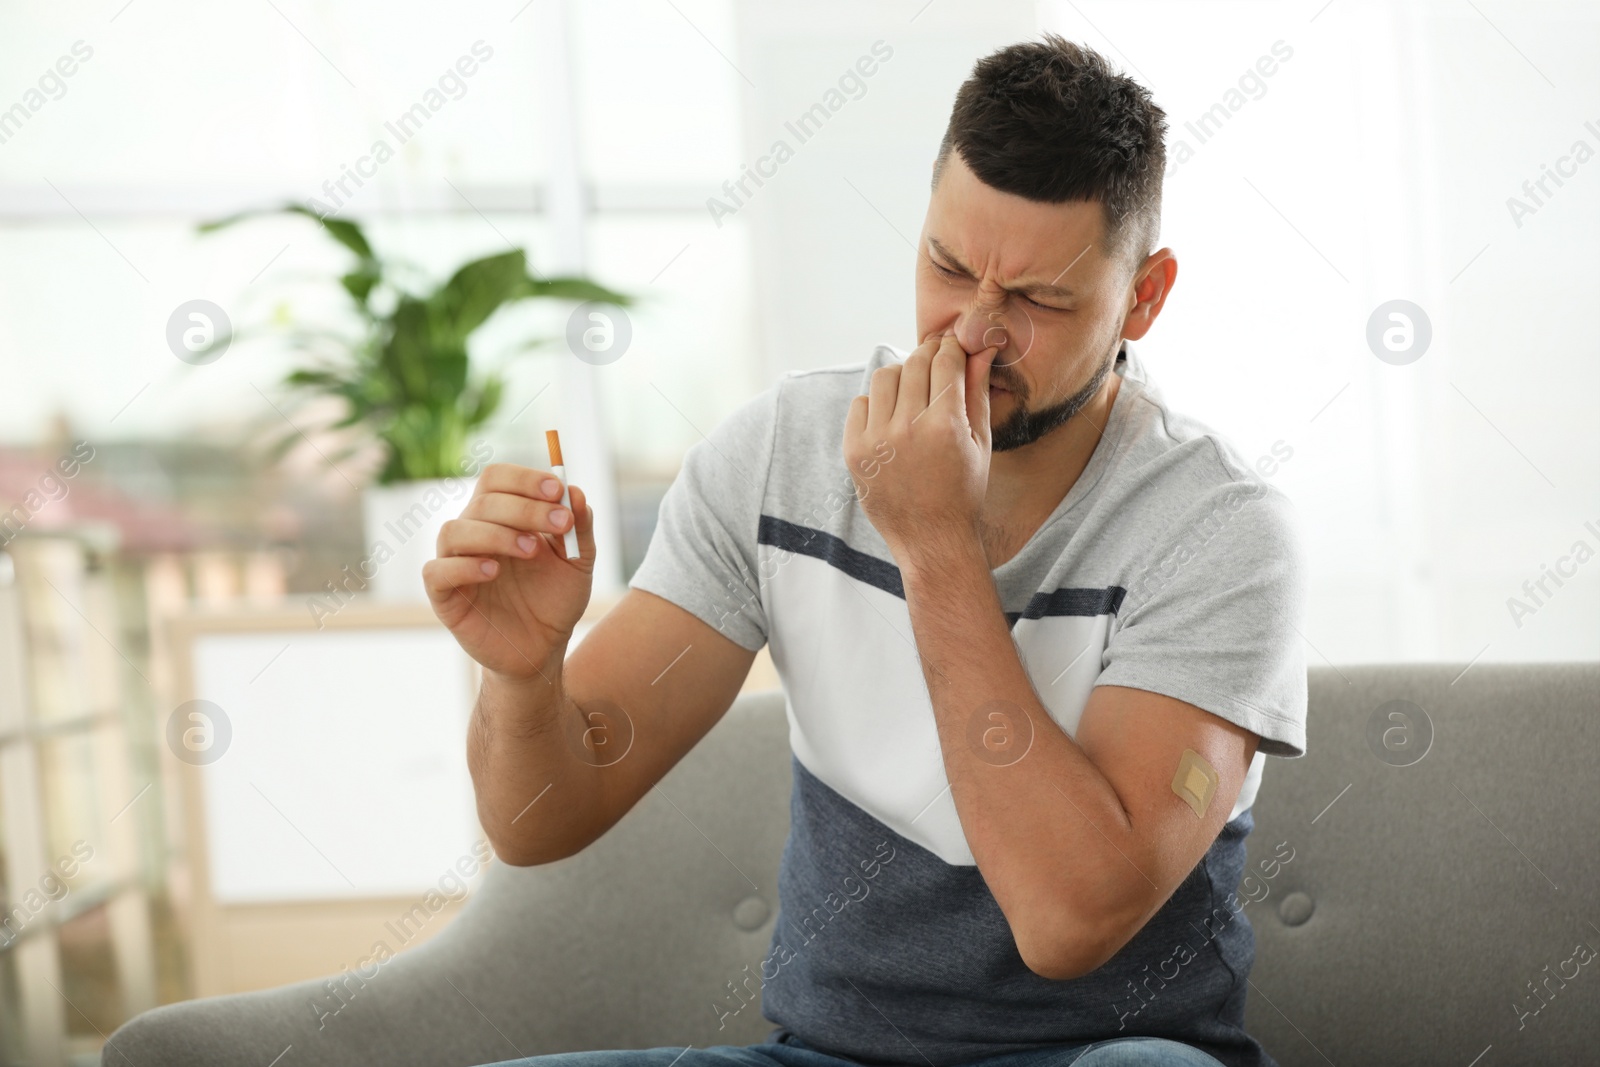 Photo of Emotional man with nicotine patch and cigarette at home